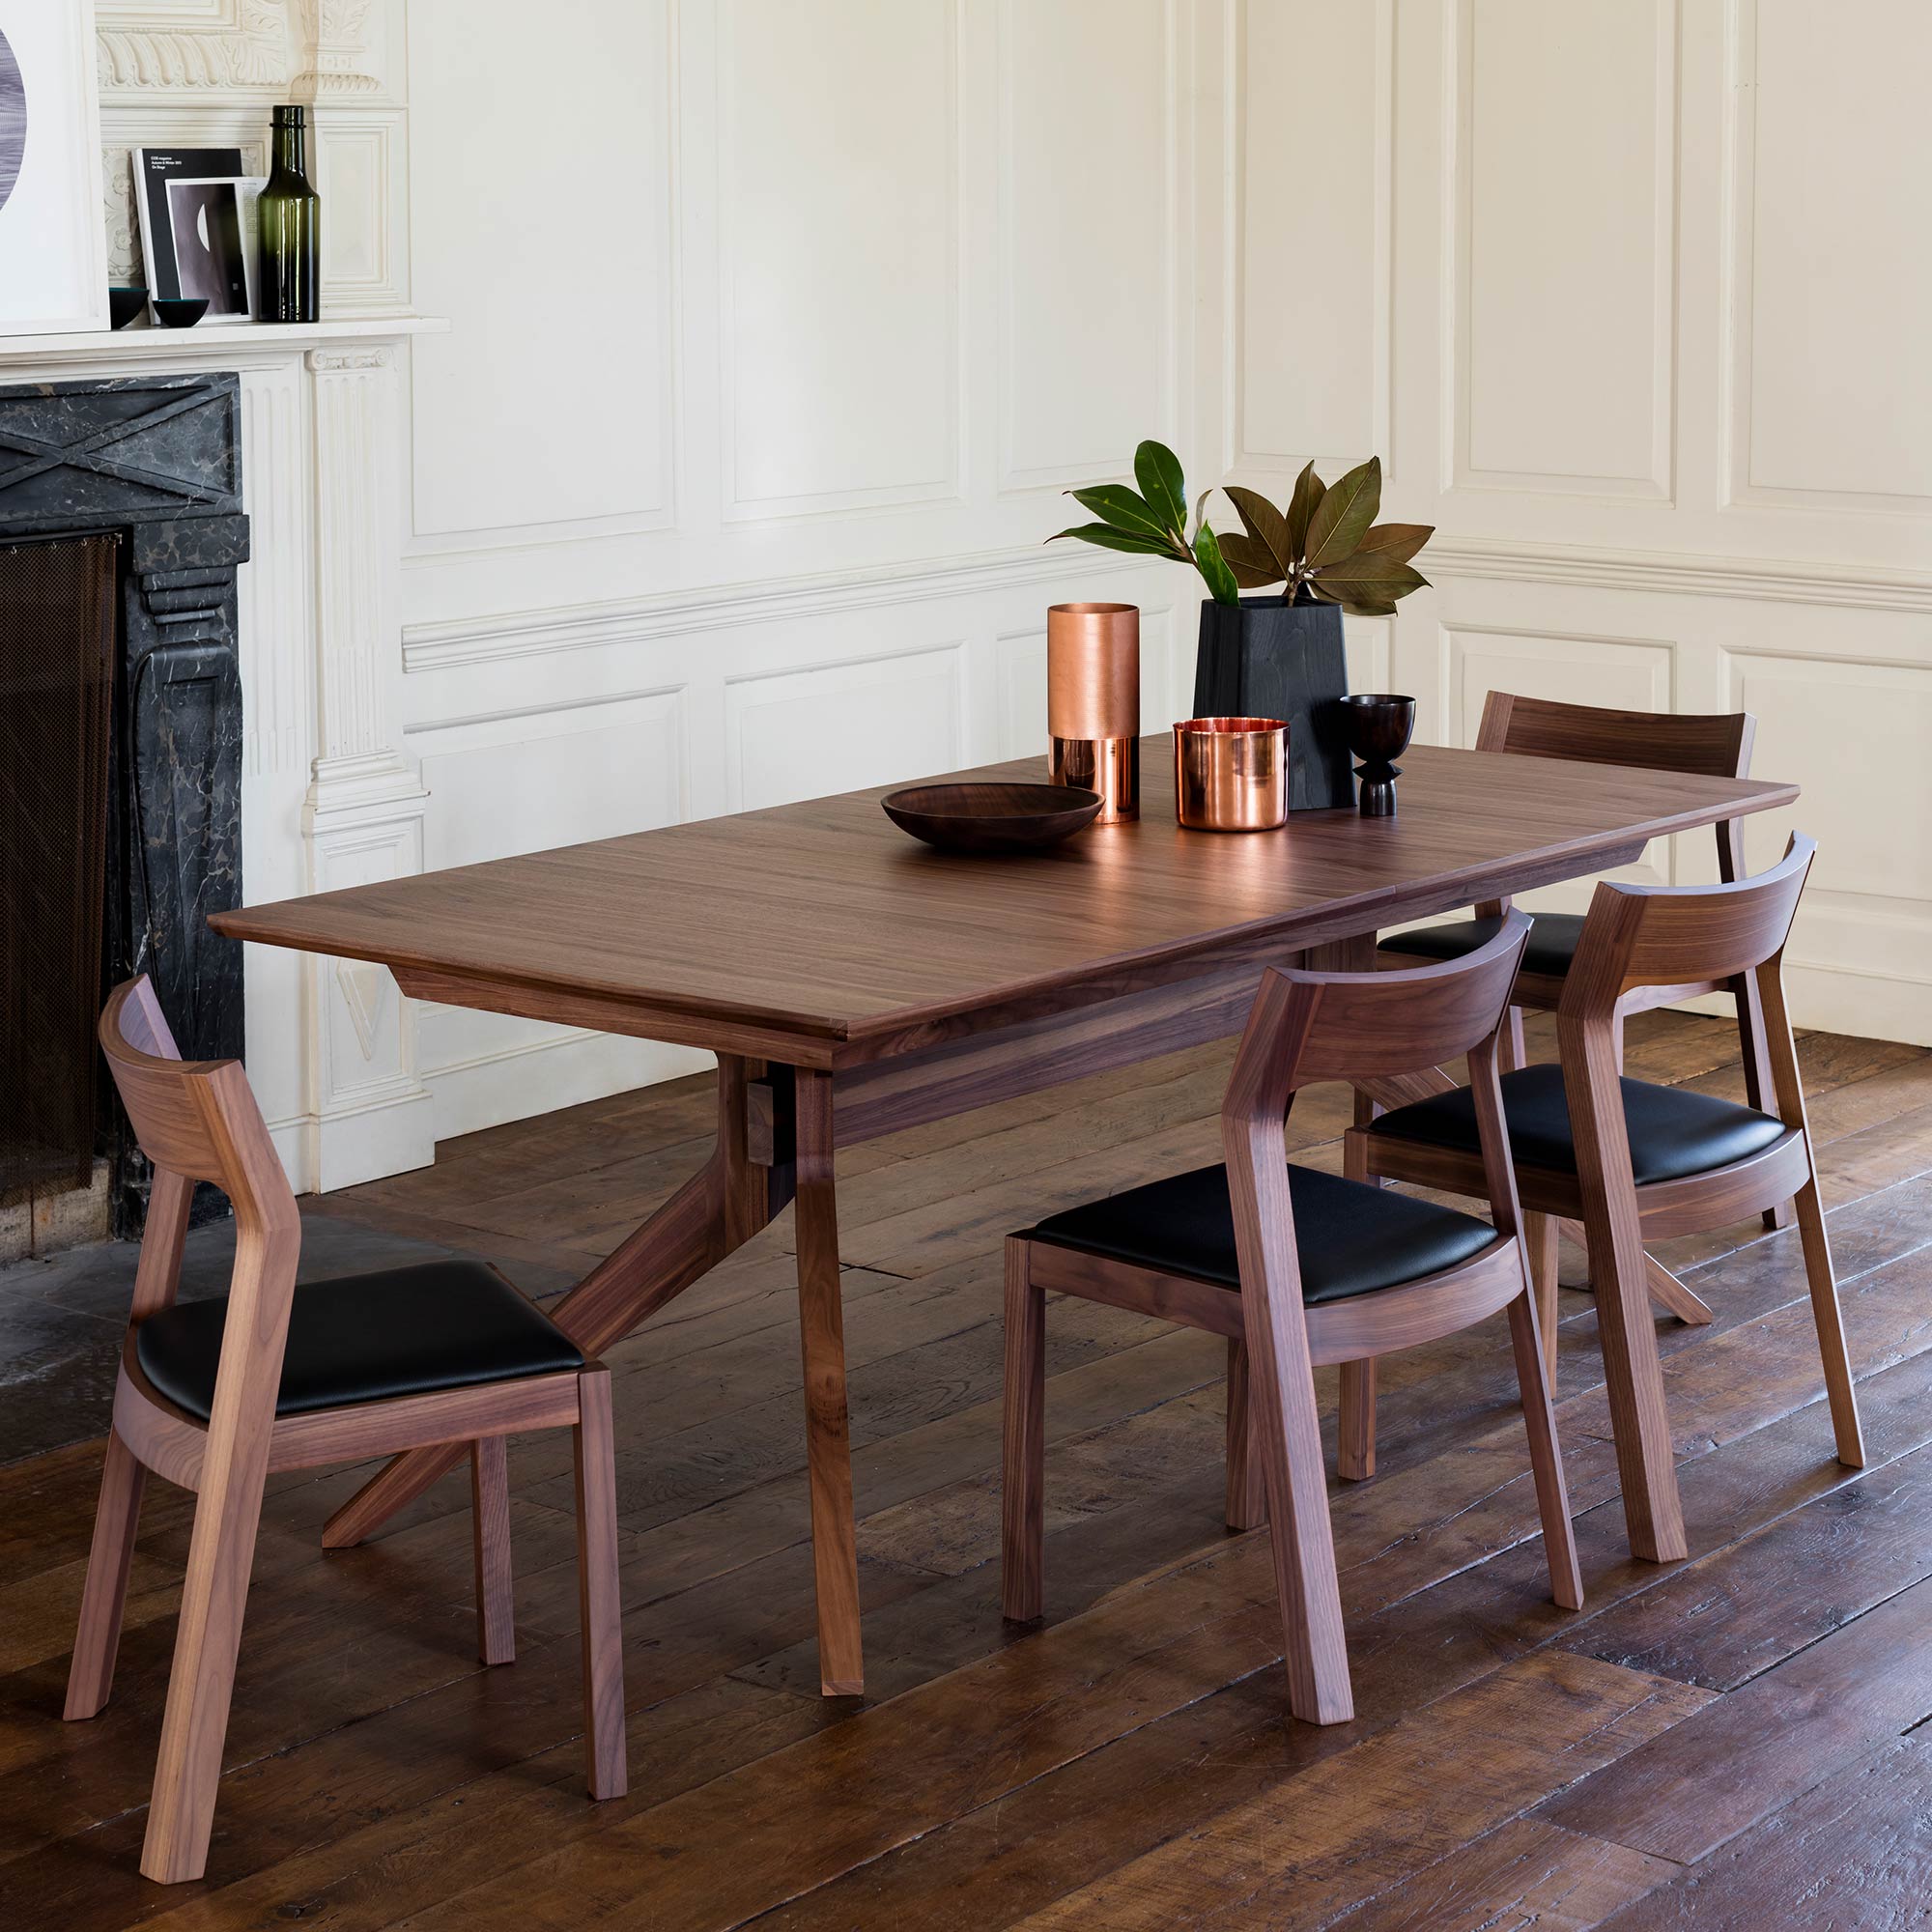 dark wooden contemporary dining table and chairs